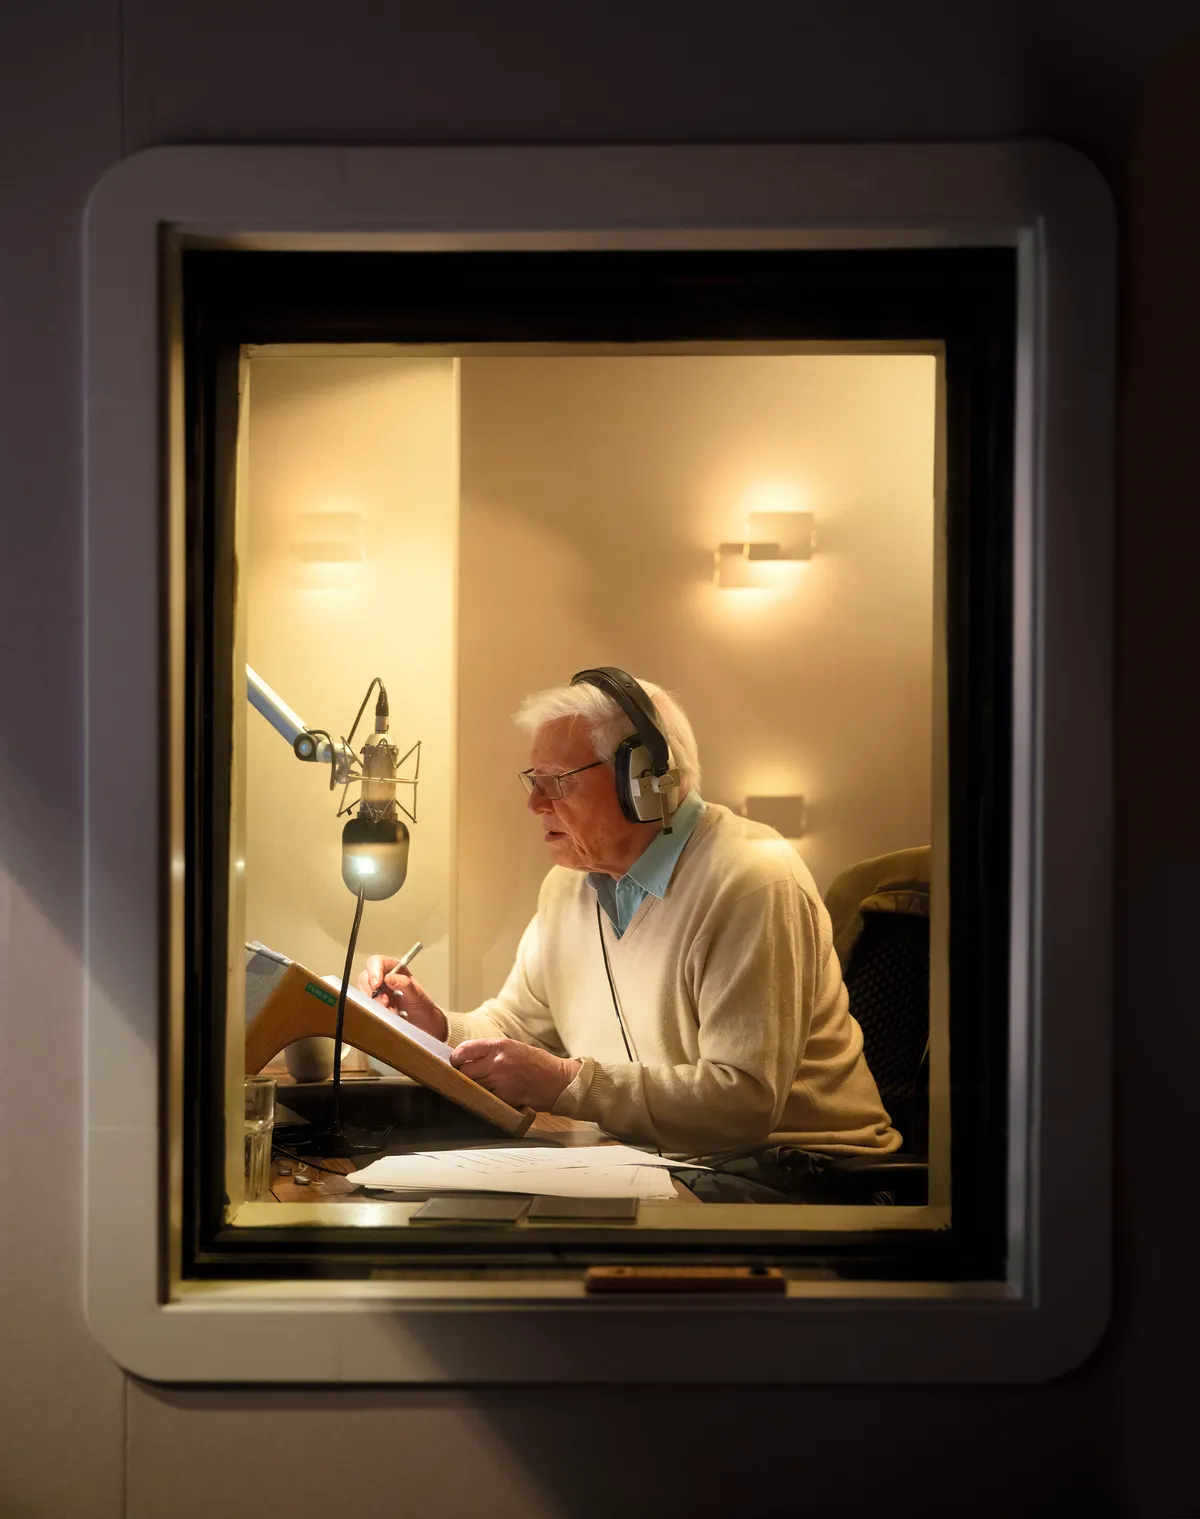 A picture of David Attenborough taken through a window as he is speaking into a microphone with headphones on.